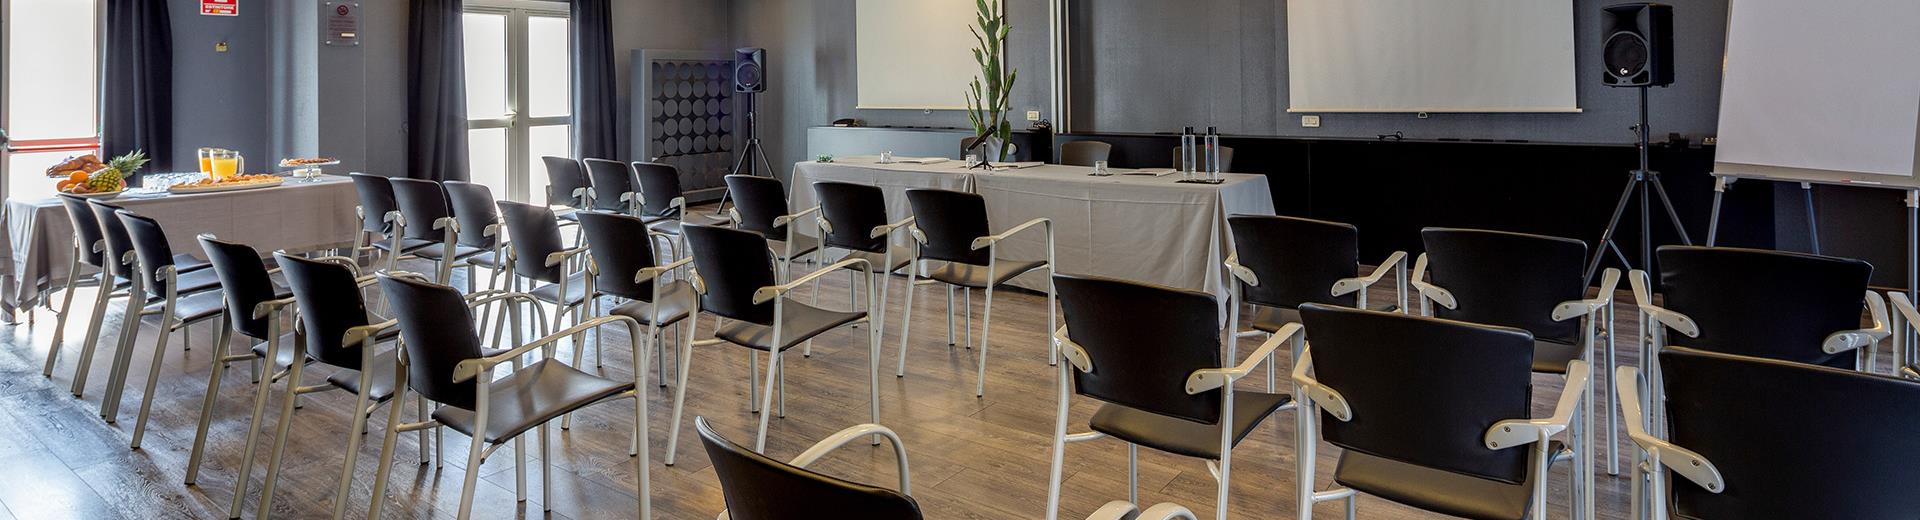 Organize your meeting in Vicenza in the modern rooms of BW Hotel Aries